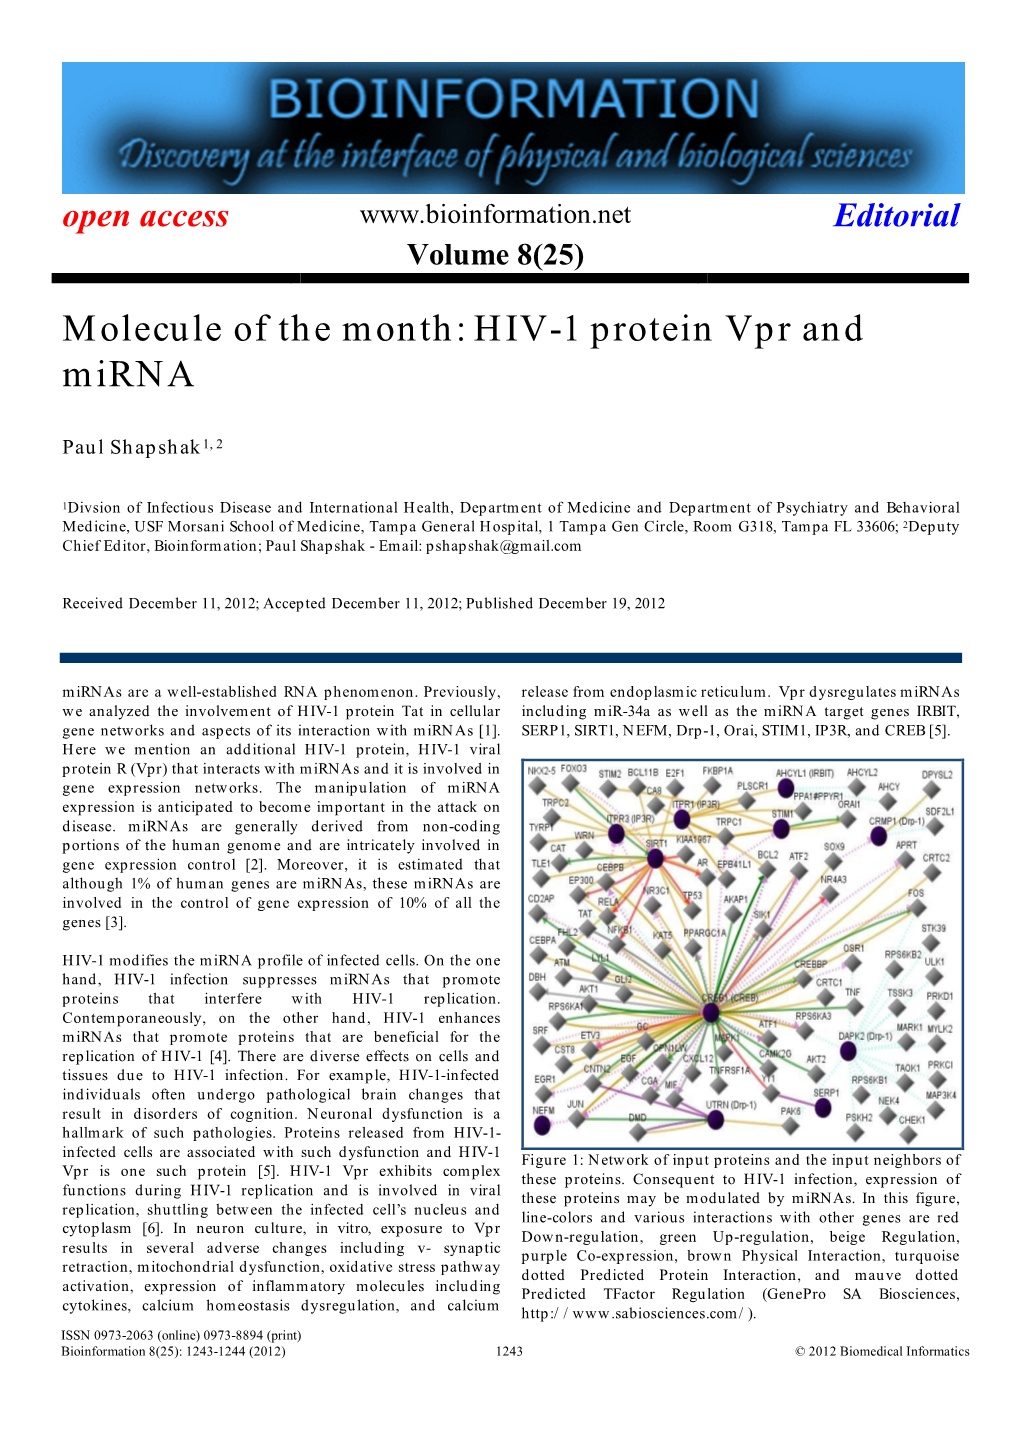 Molecule of the Month: HIV-1 Protein Vpr and Mirna